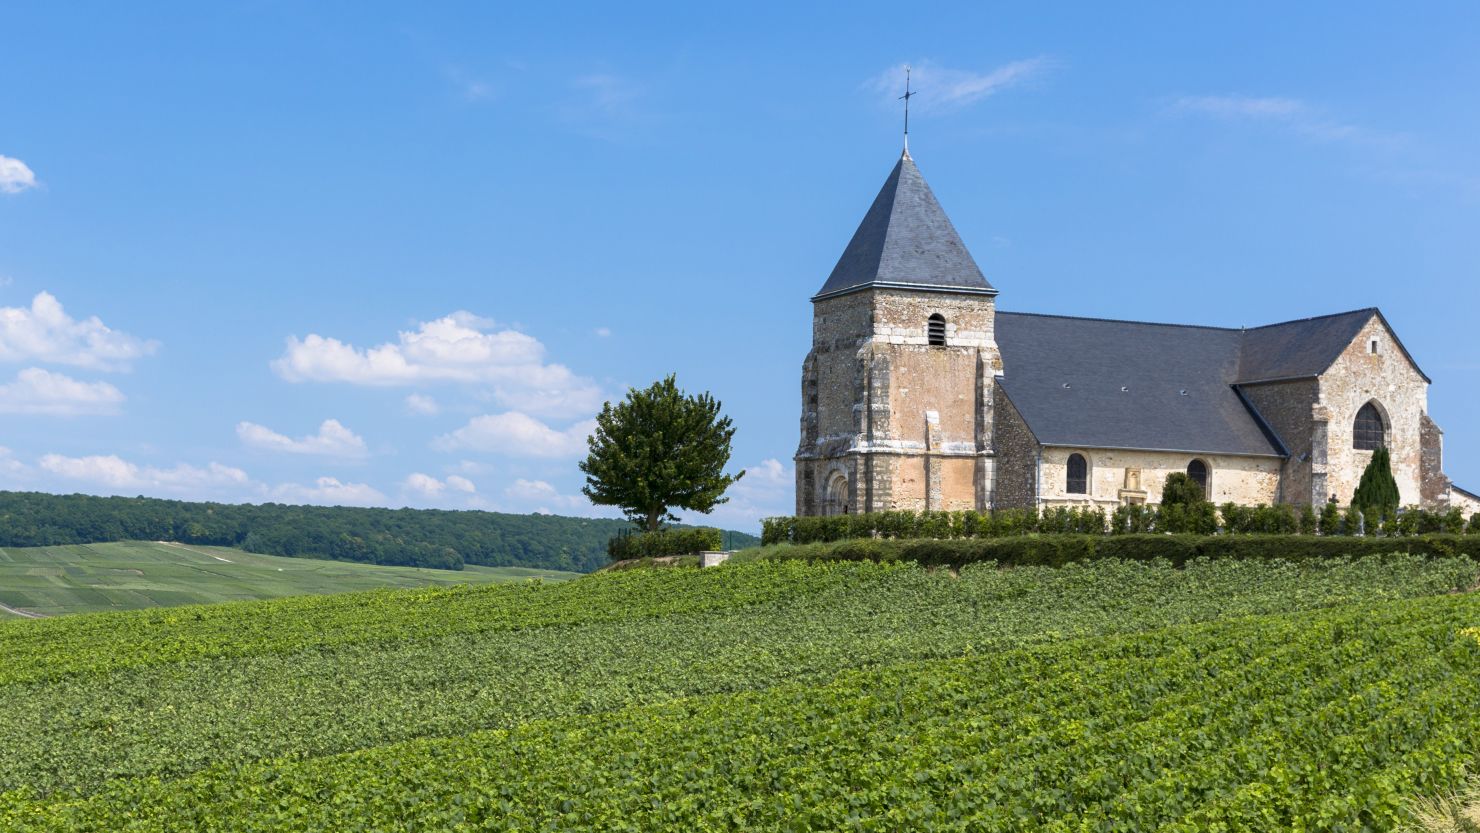 12th century church of Chavot in the Champagne-Ardenne region.